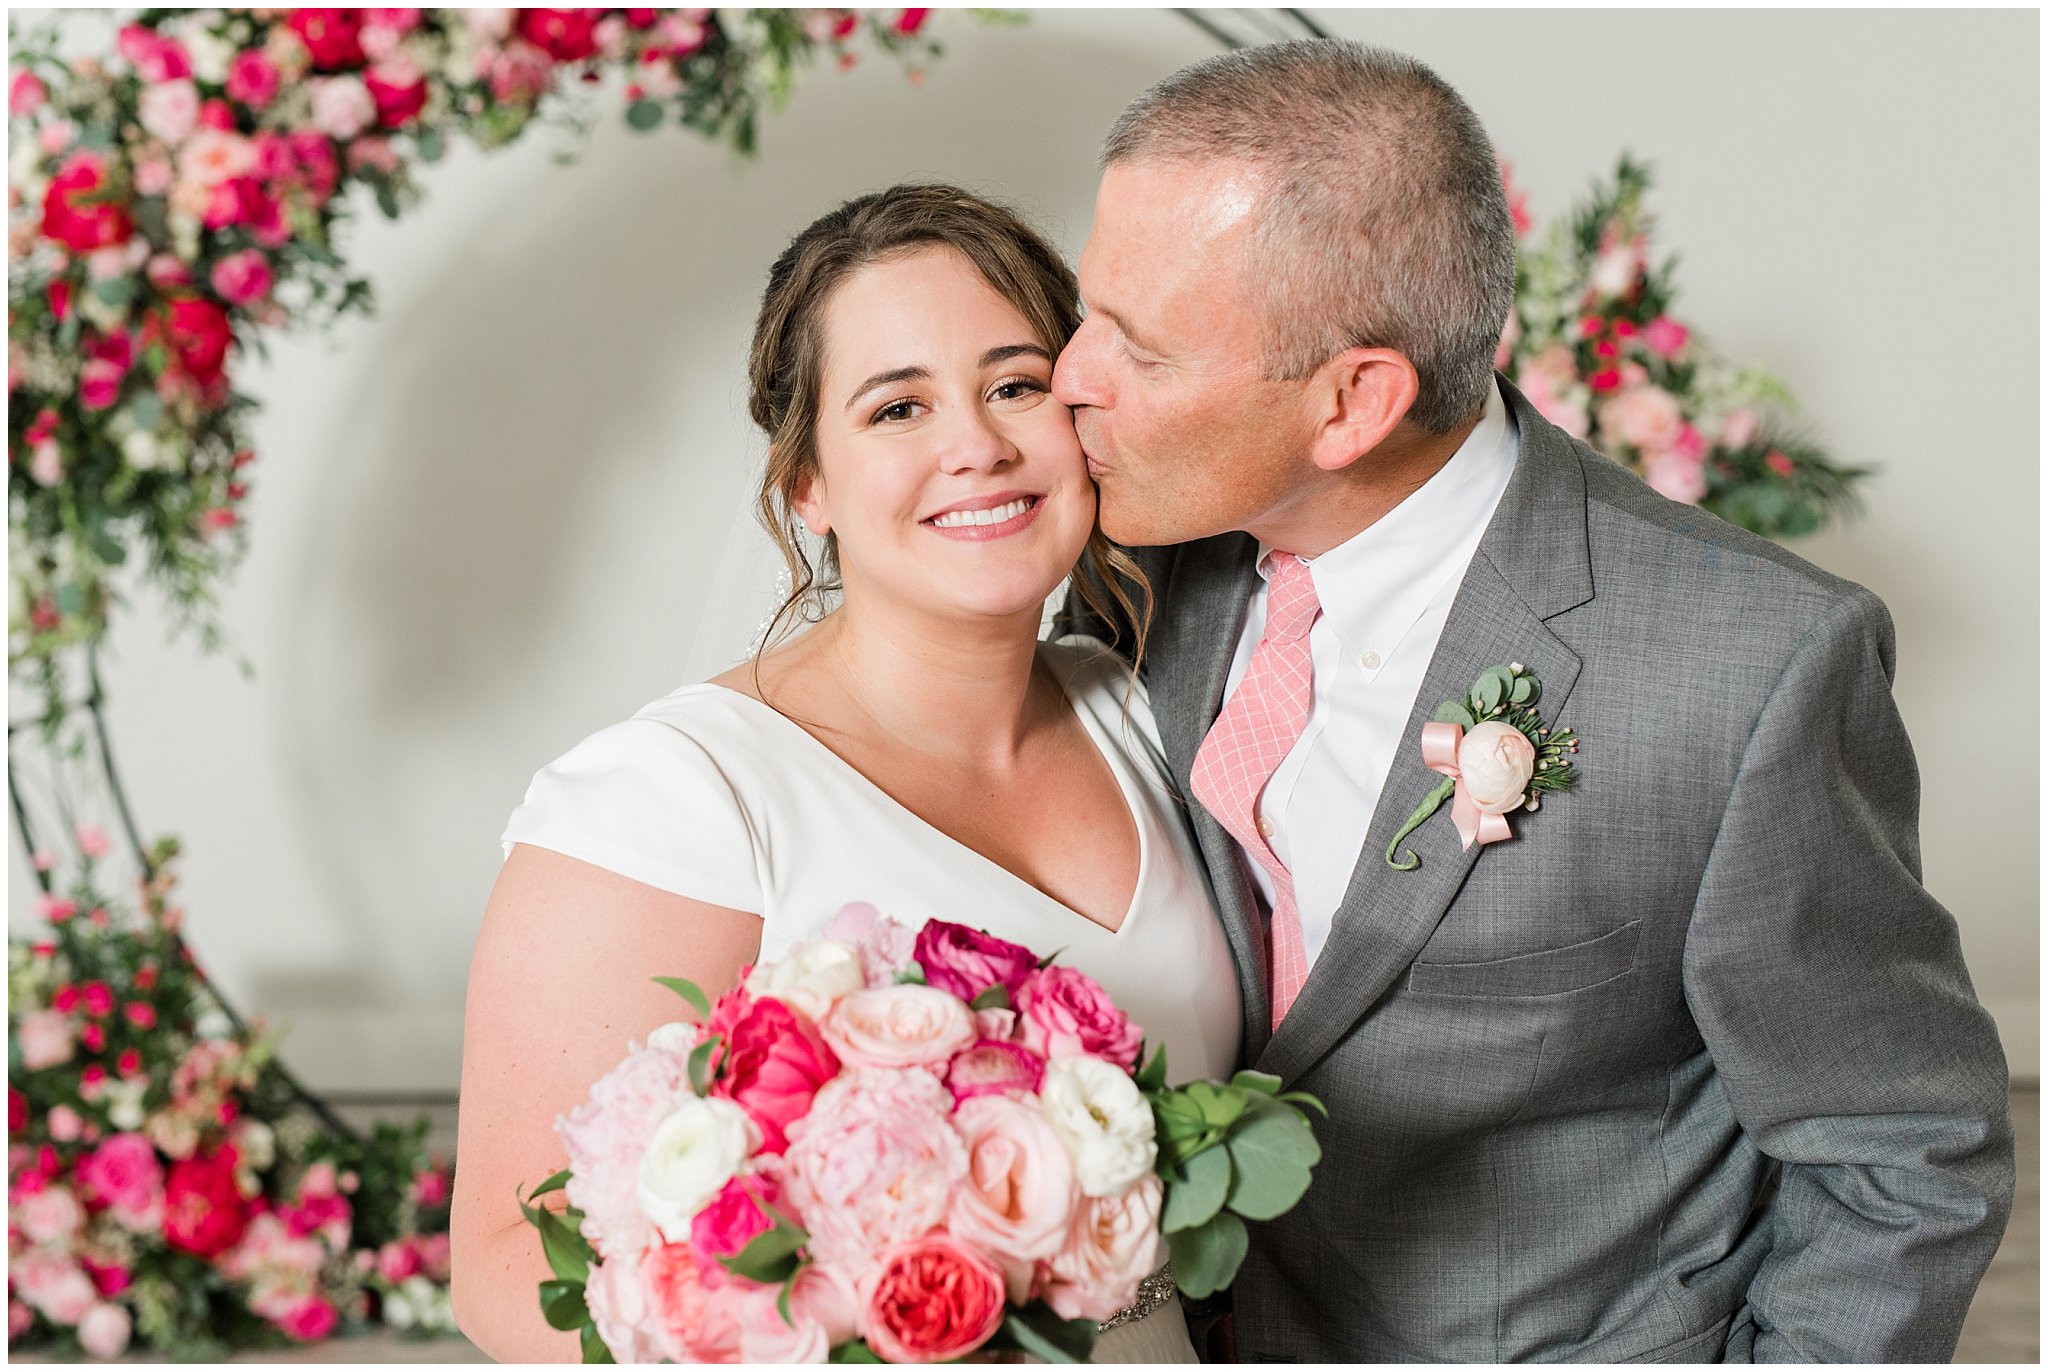 Family portraits in front of floral arch in shades of pink | Talia Event Center Summer Wedding | Jessie and Dallin Photography